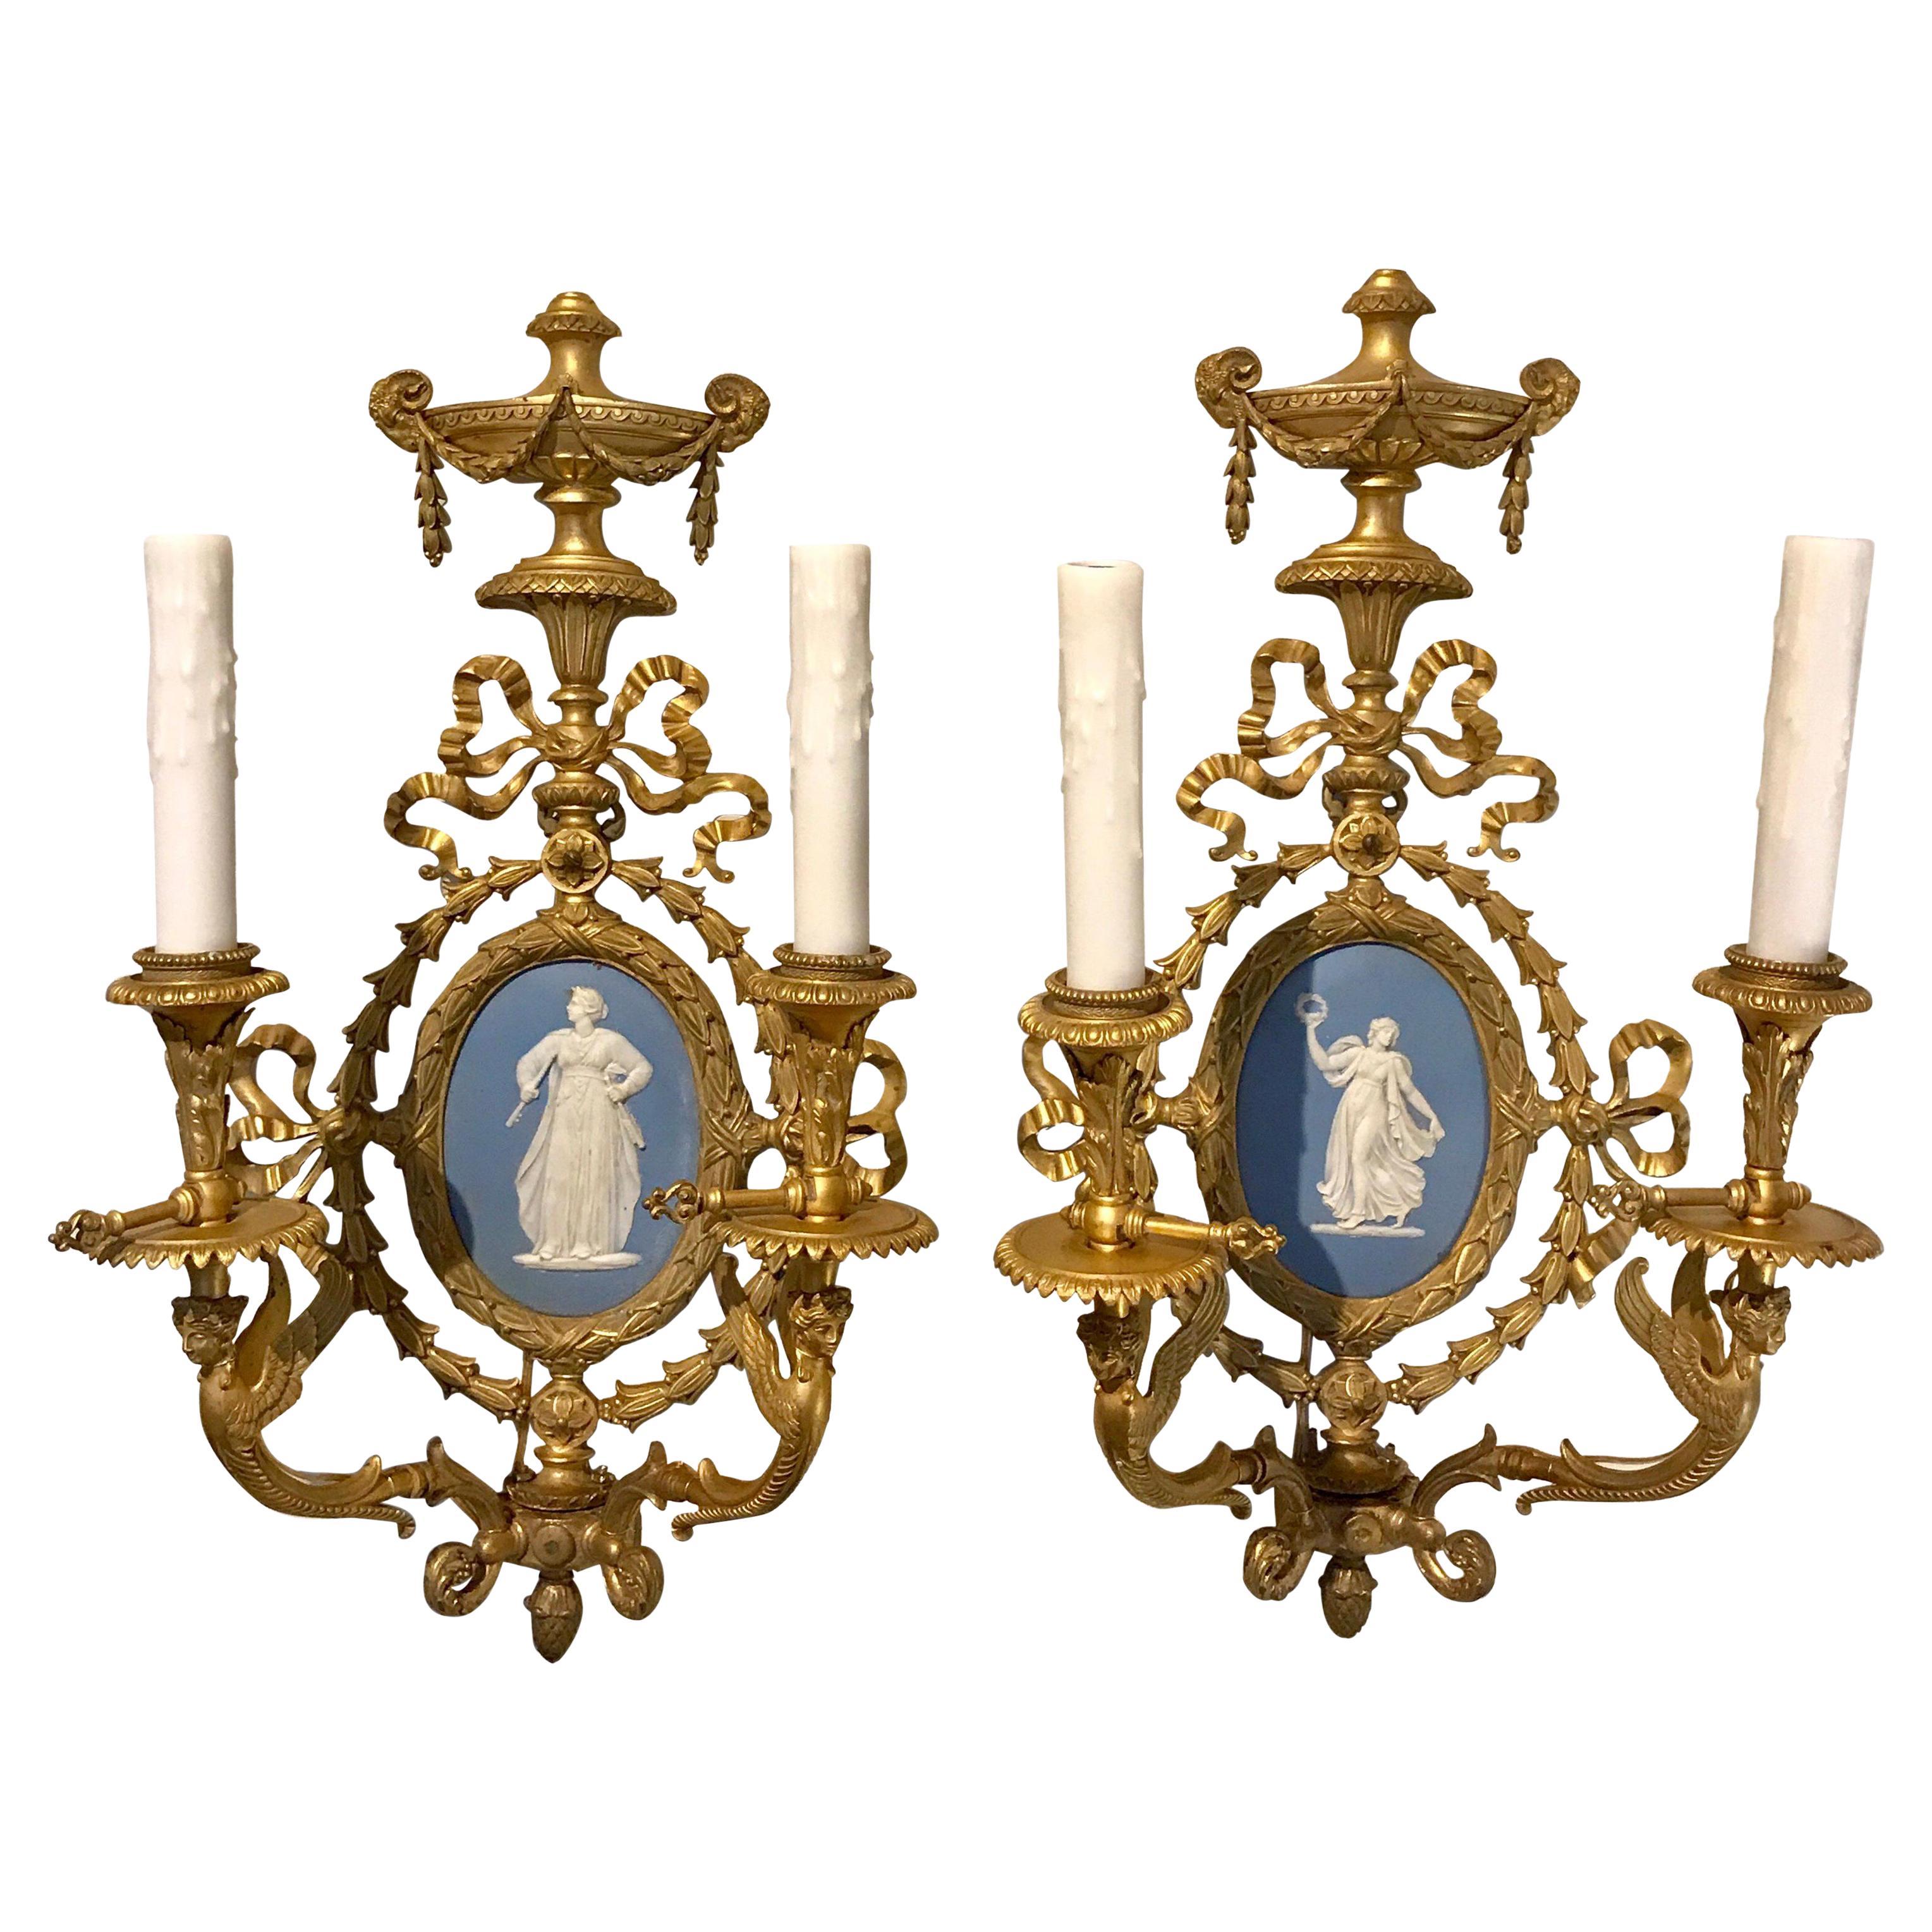 Pair of Exquisite Adam Style Ormolu Wall Sconces with Wedgwood Plaques